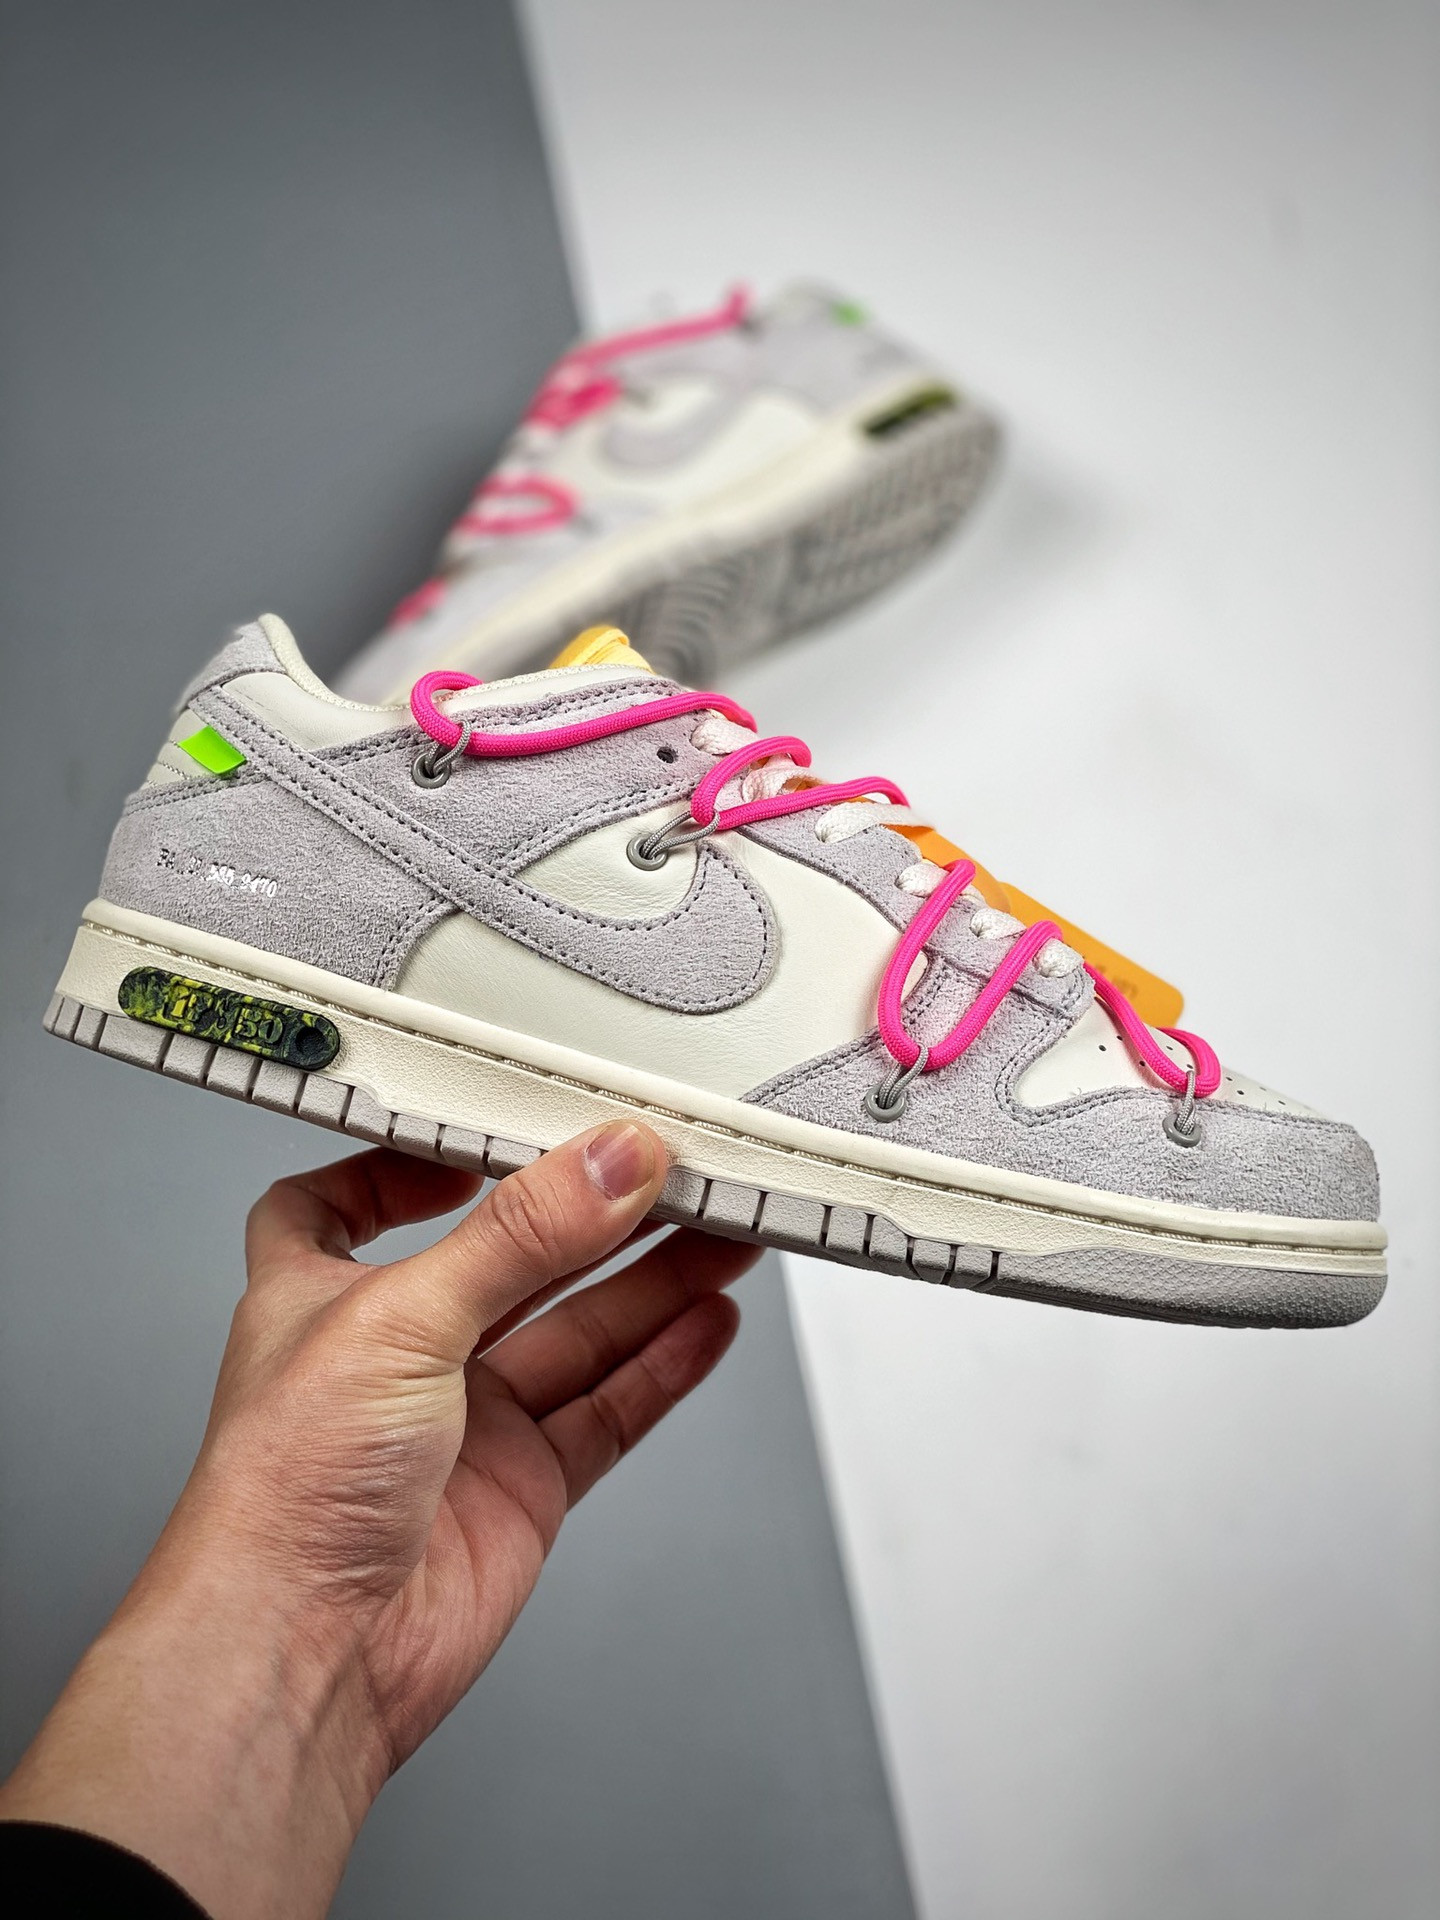 Off-White x Nike Dunk Low 17 of 50 Sail Neutral Grey Hyper Pink For Sale